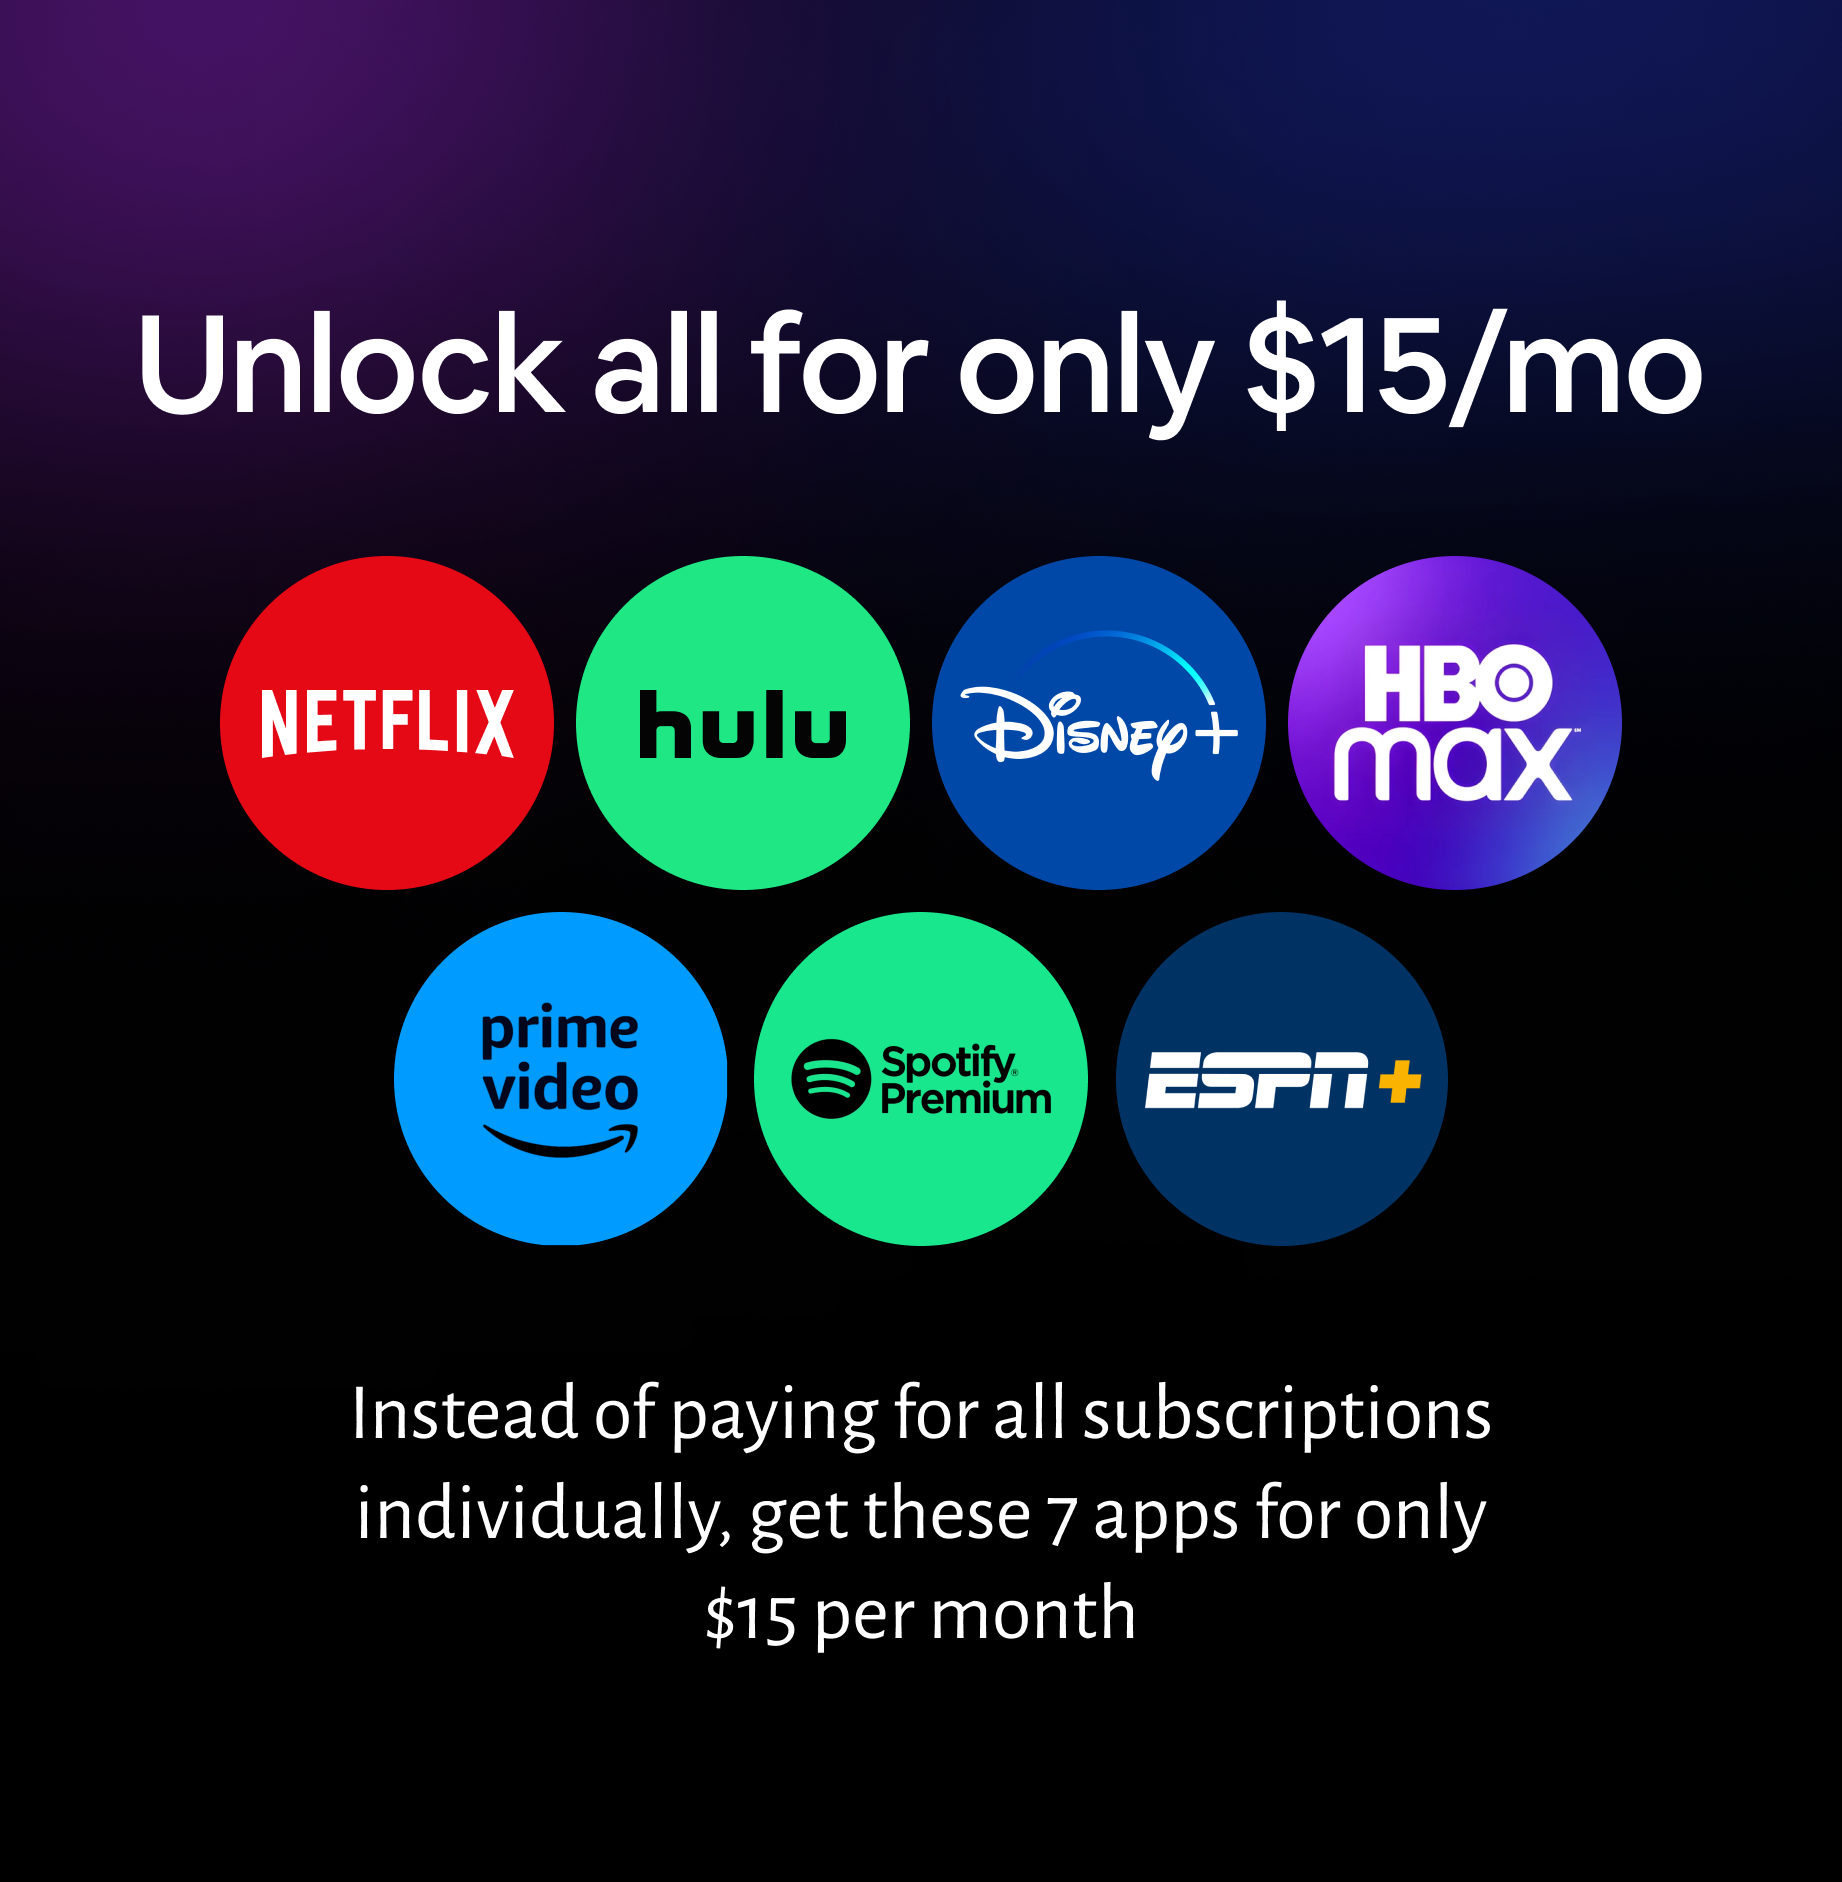 All Streaming services in a subscription for $15/month / Alle Streaming-Services für $15 / Monat